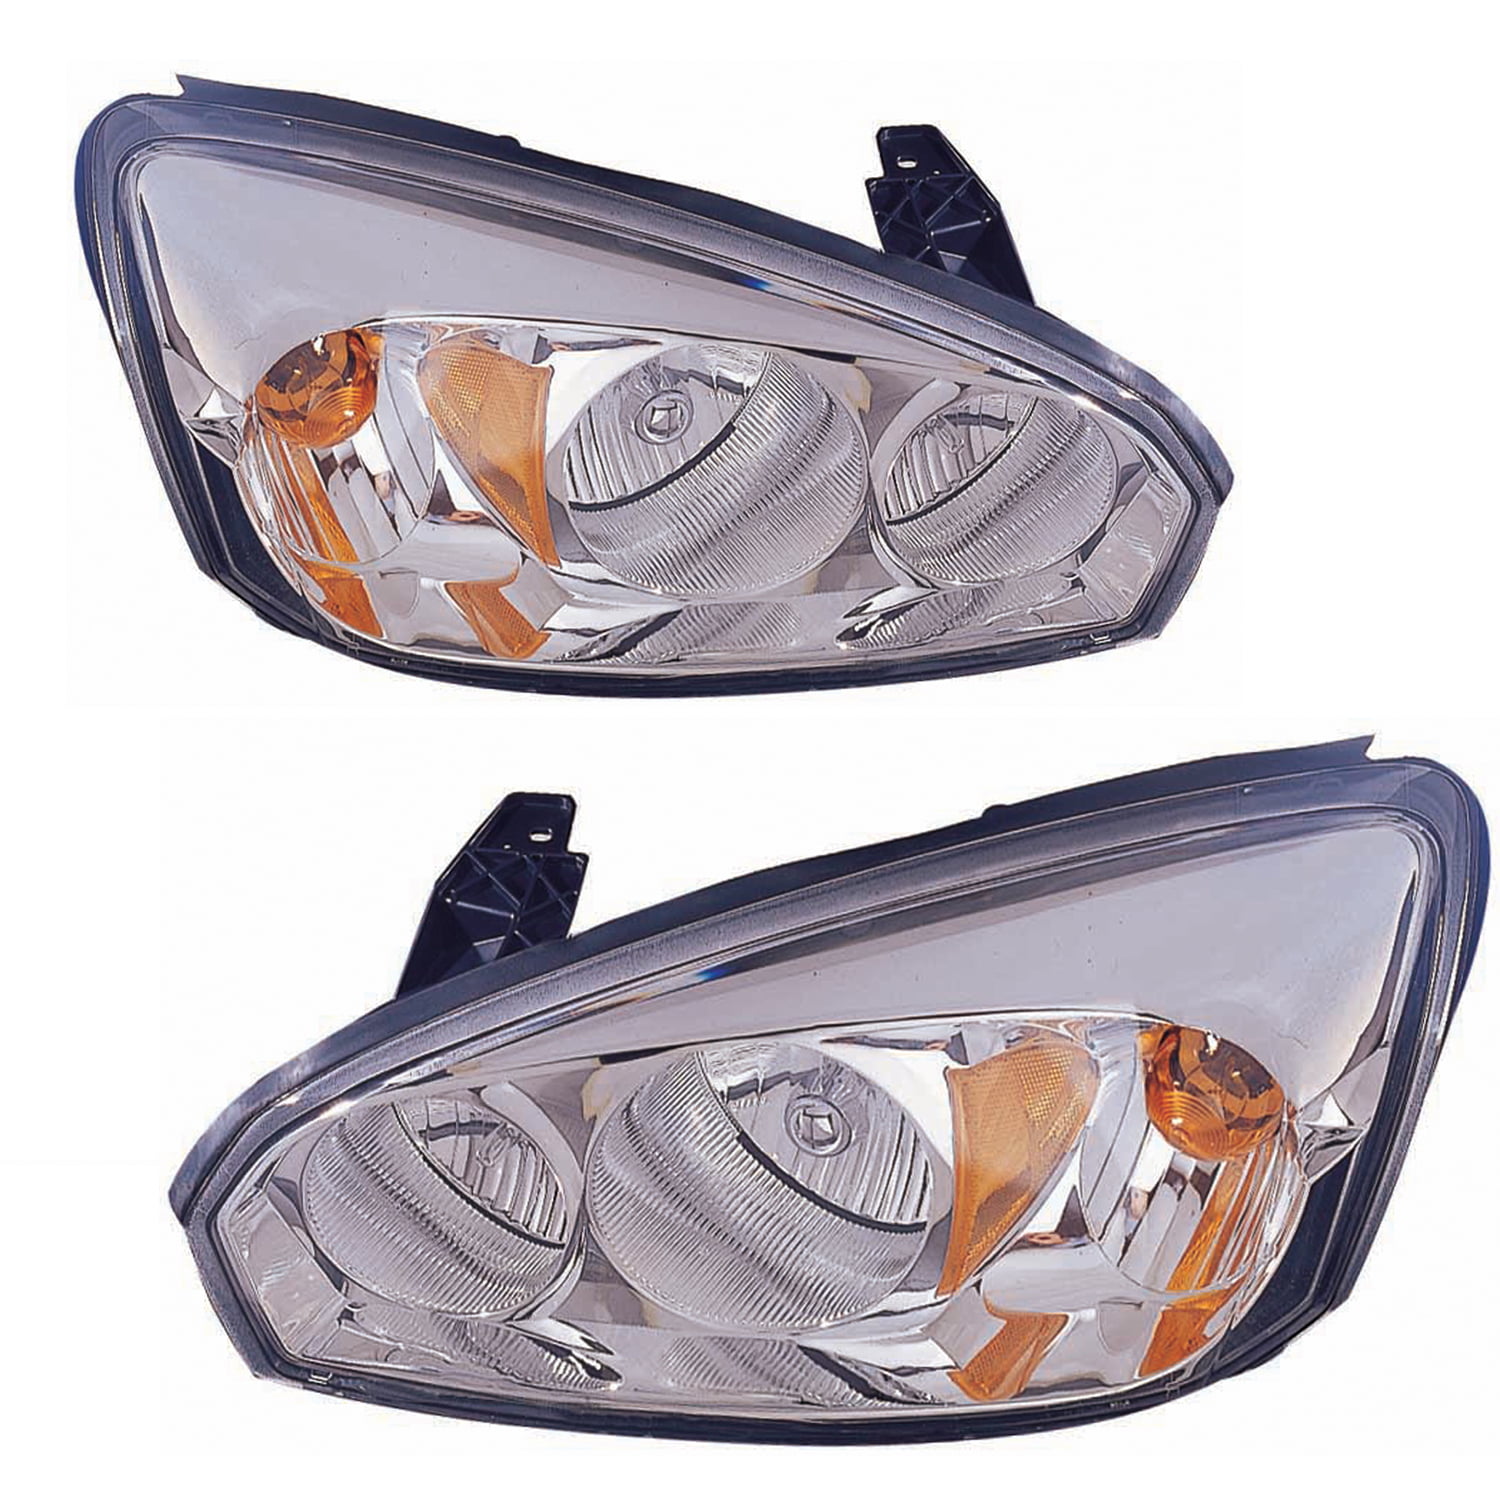 HEADLIGHTSDEPOT Compatible with Chevy Malibu Headlights OE Style Replacement Headlamps Driver/Passenger Pair New 